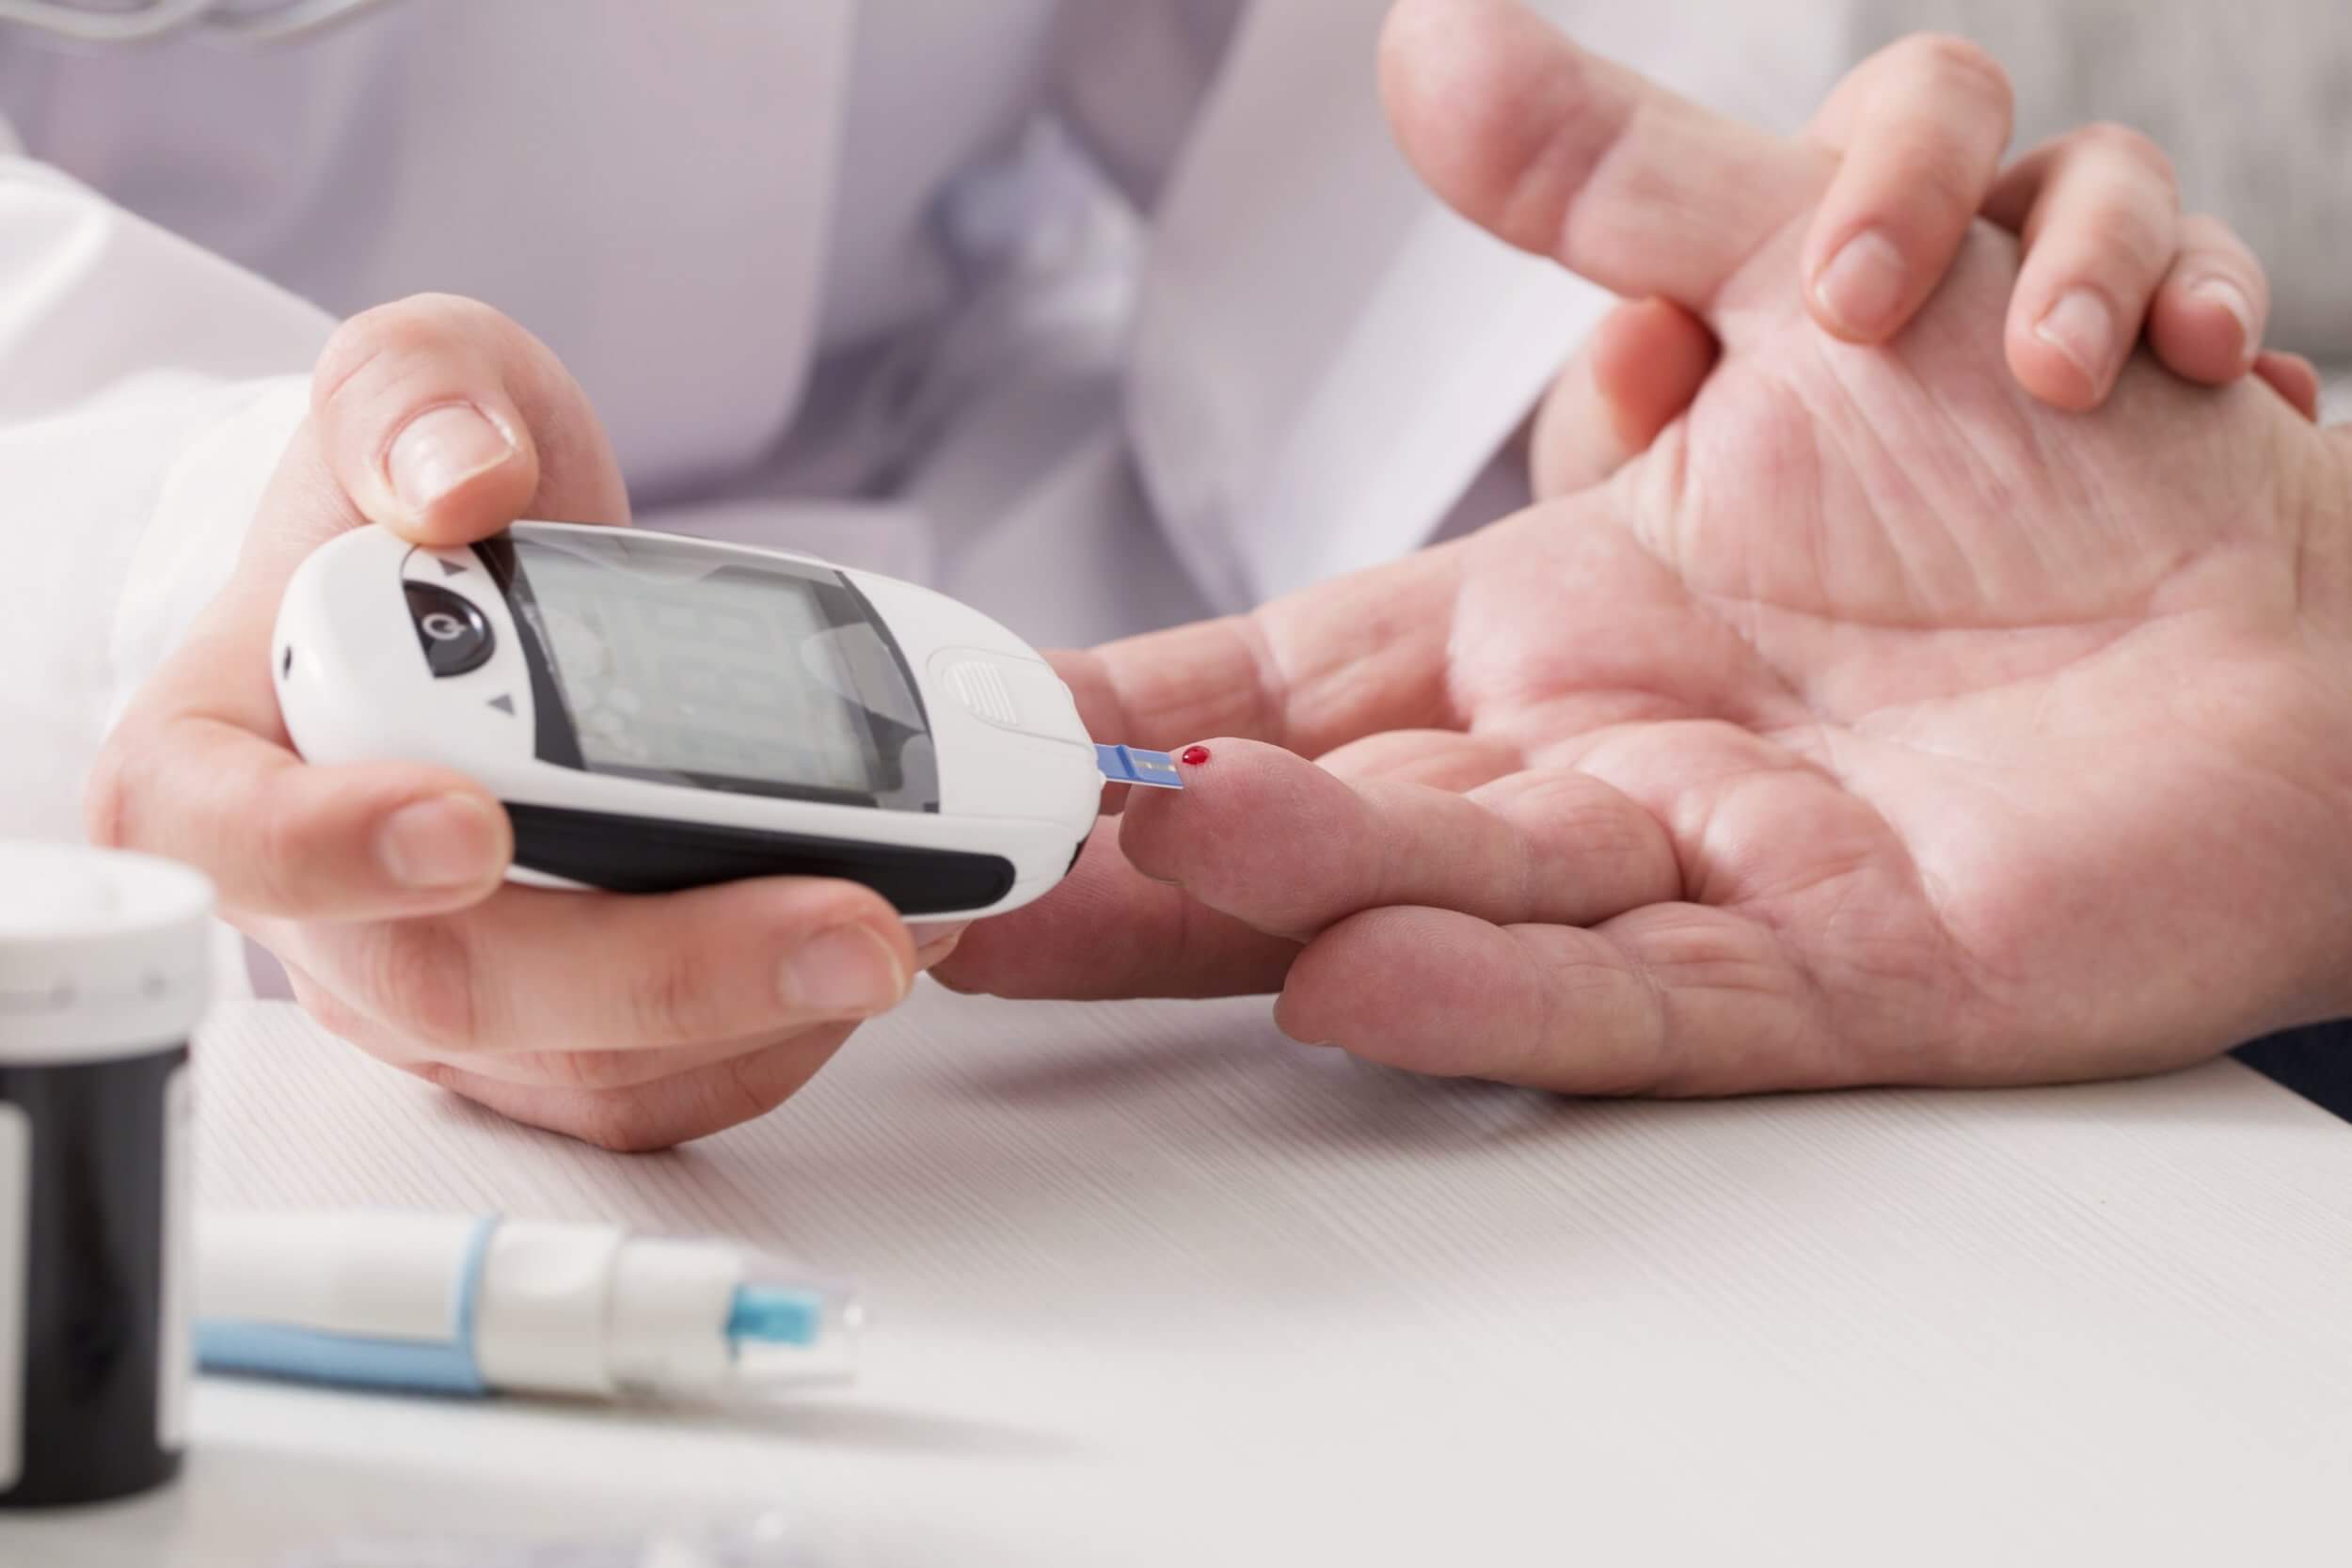 Continuous Blood Glucose Monitoring Systems Part 1: The Evolution Of Blood Glucose Monitoring In The Diabetic Patient